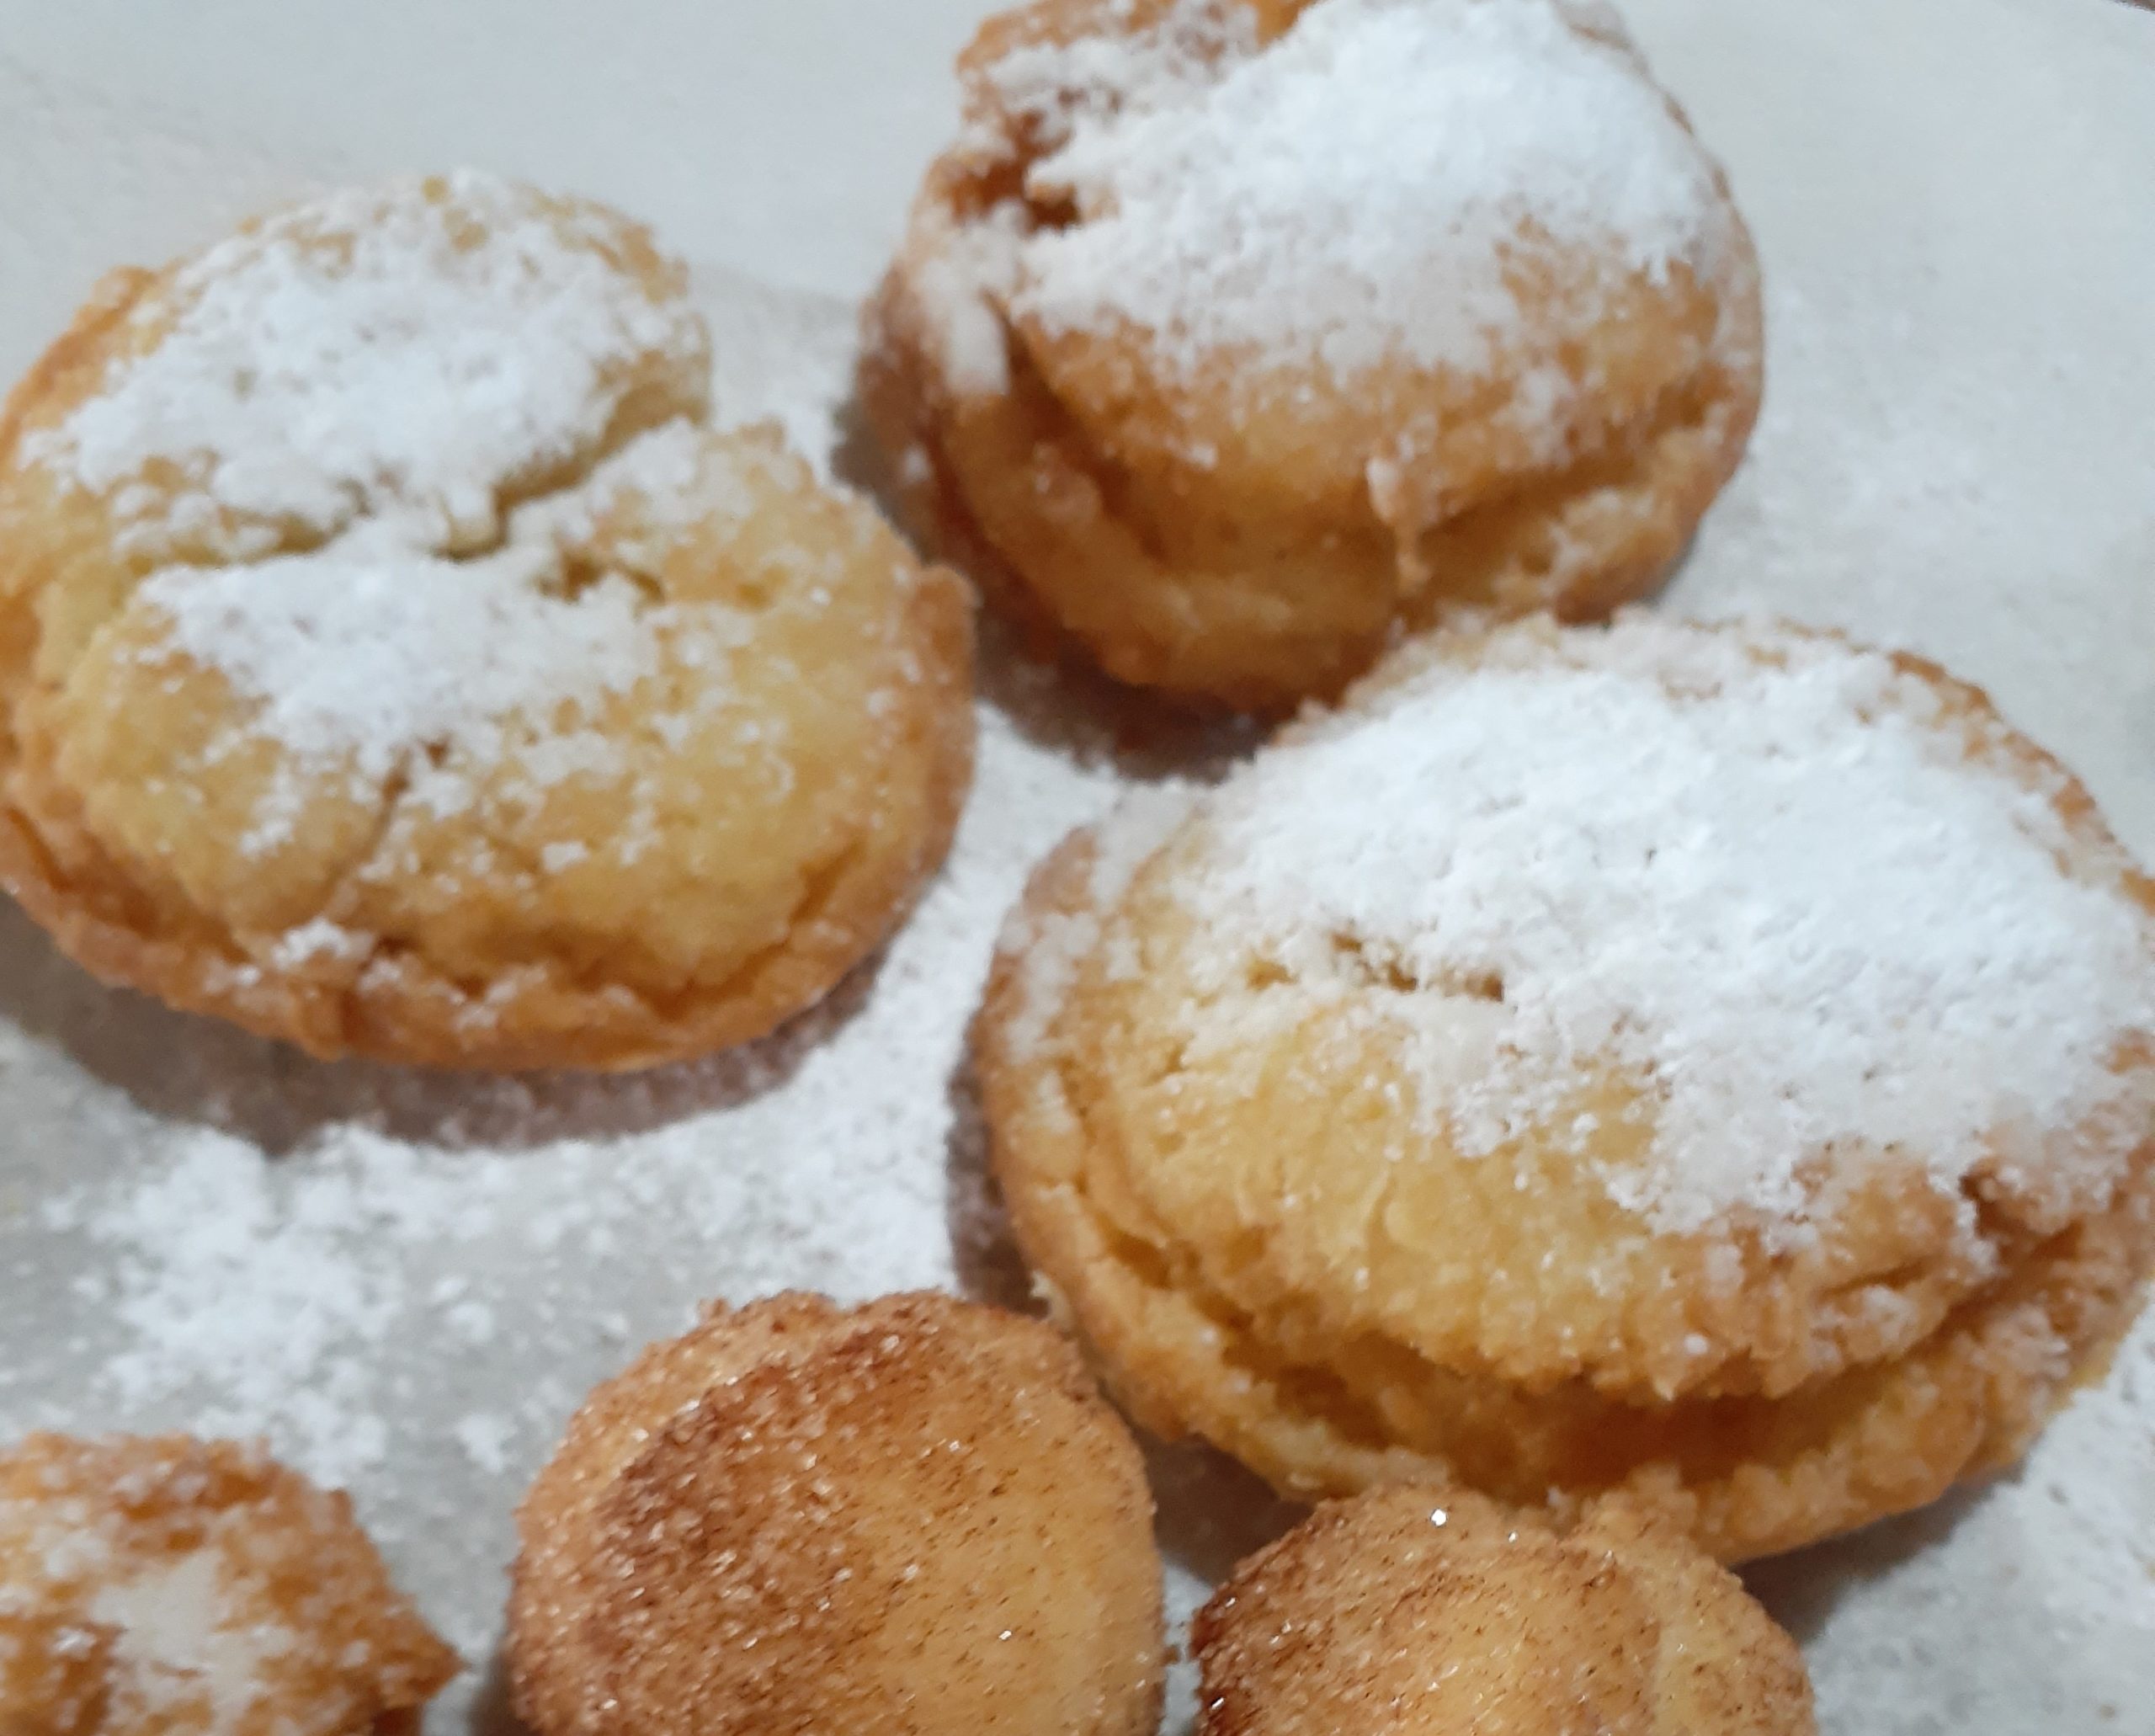 Woodstove Cooking Class: Doughnuts are My Jam